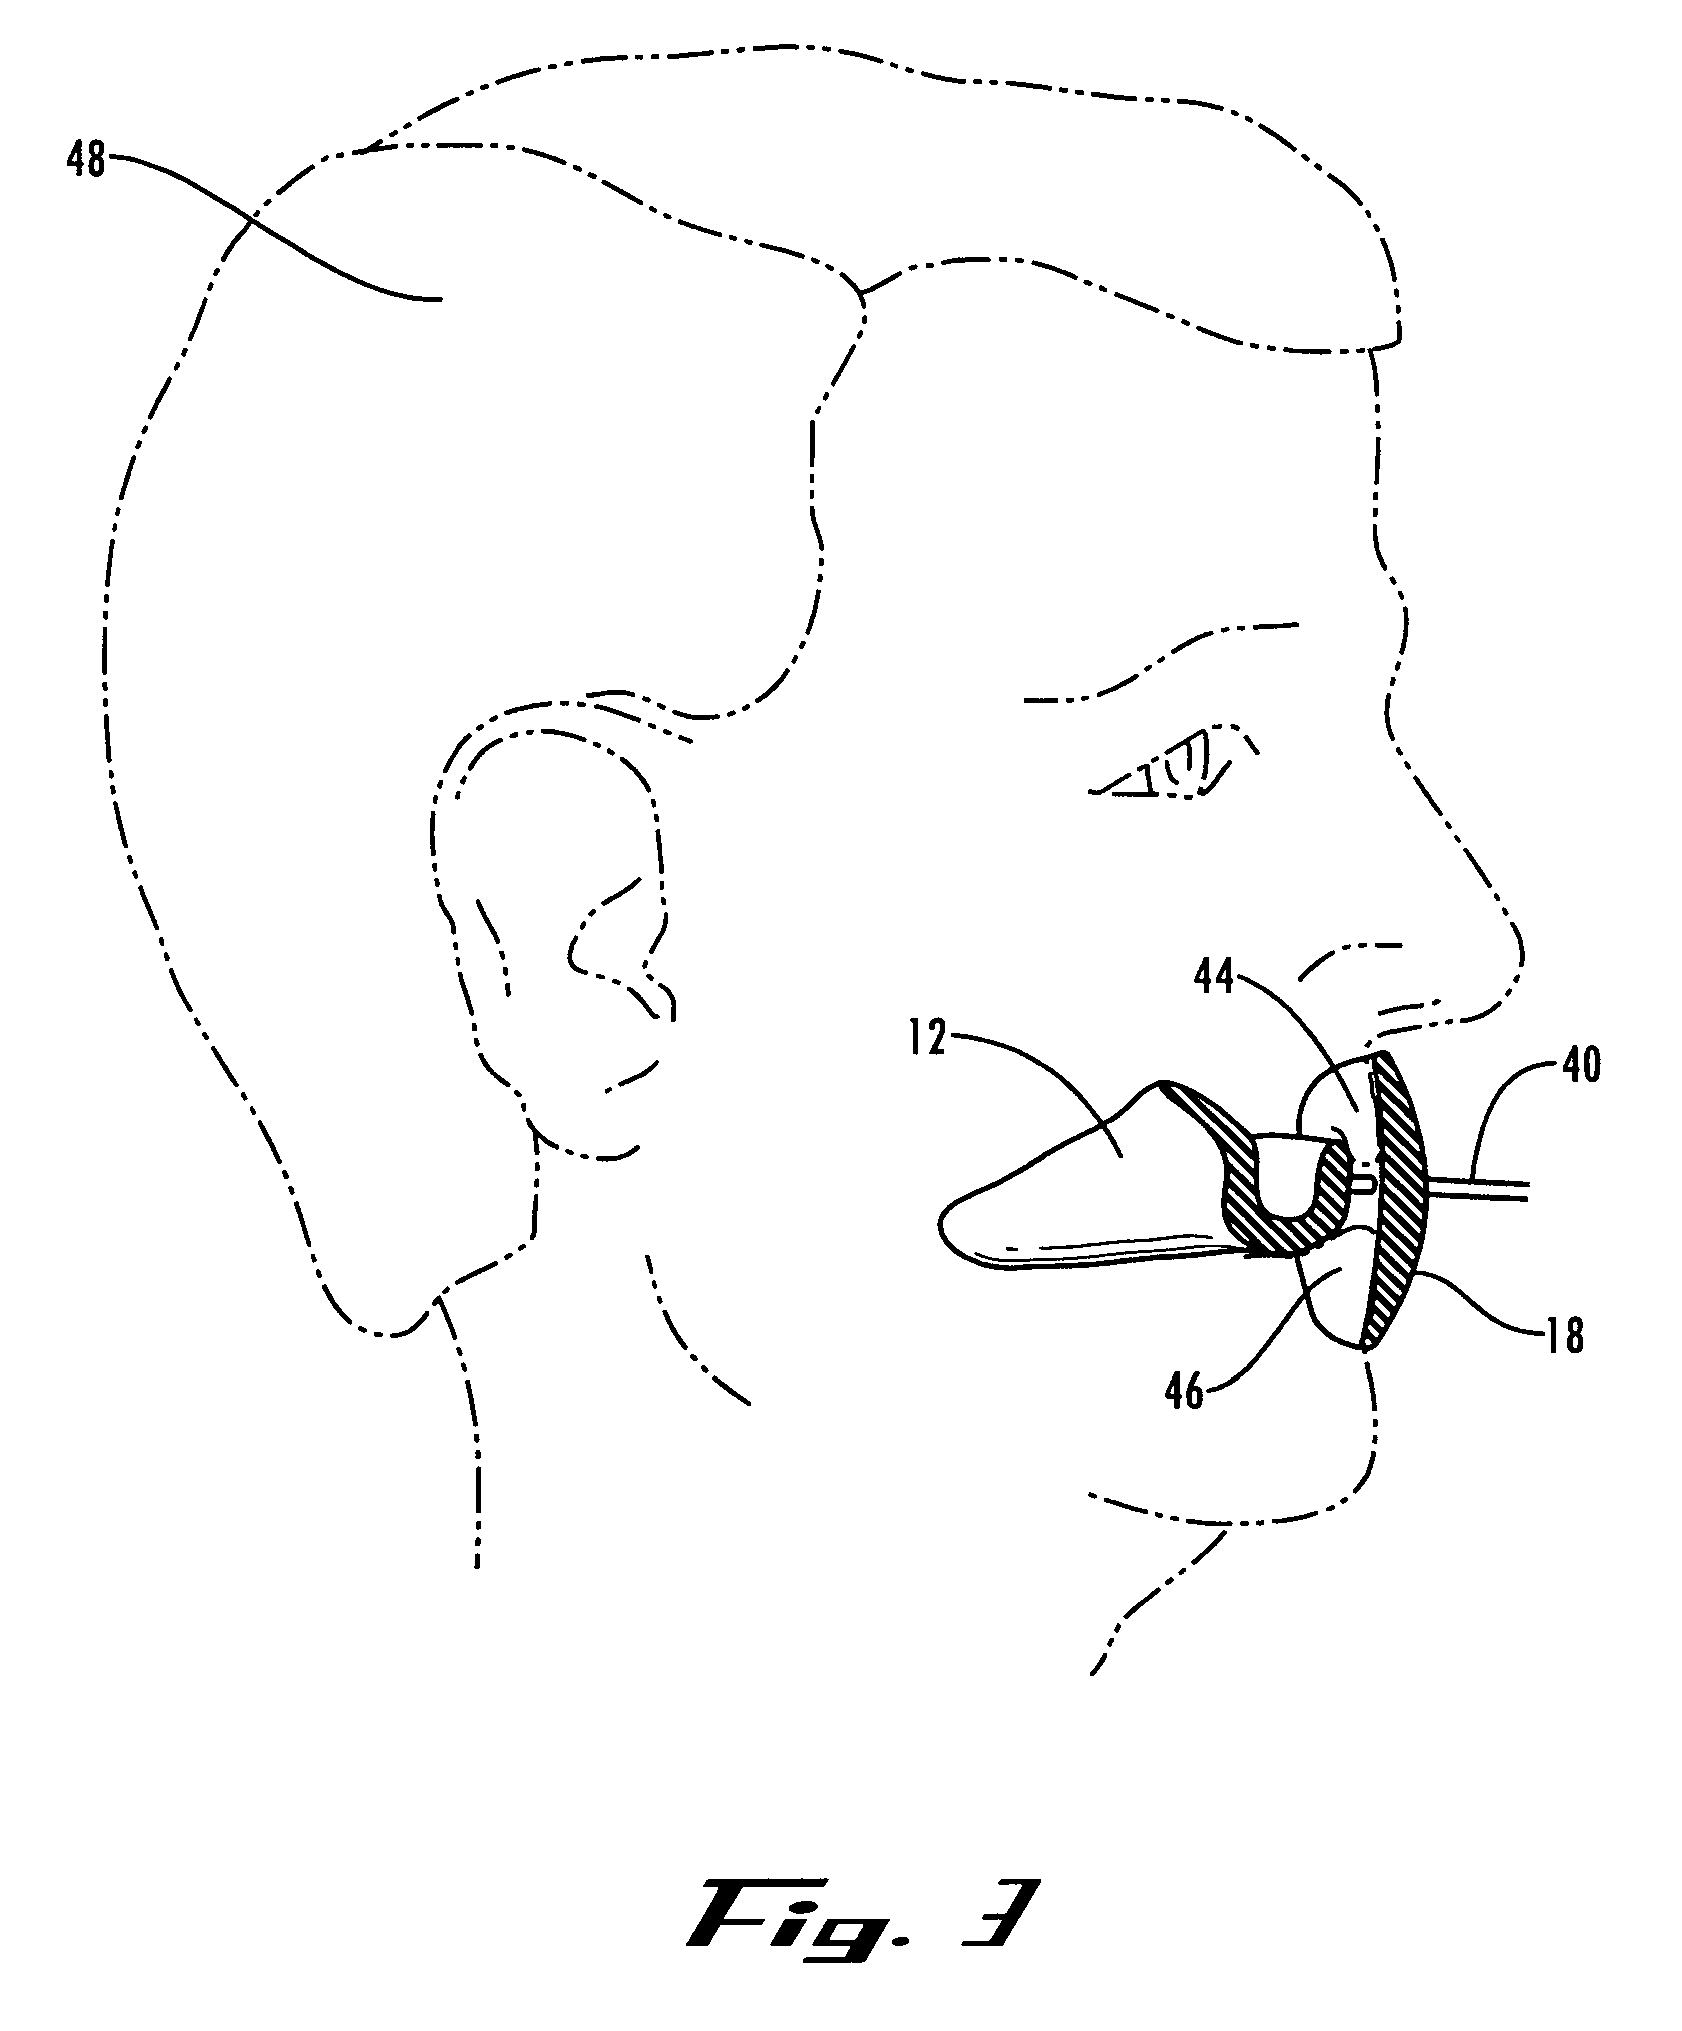 Assisted breathing device and method of wearing same